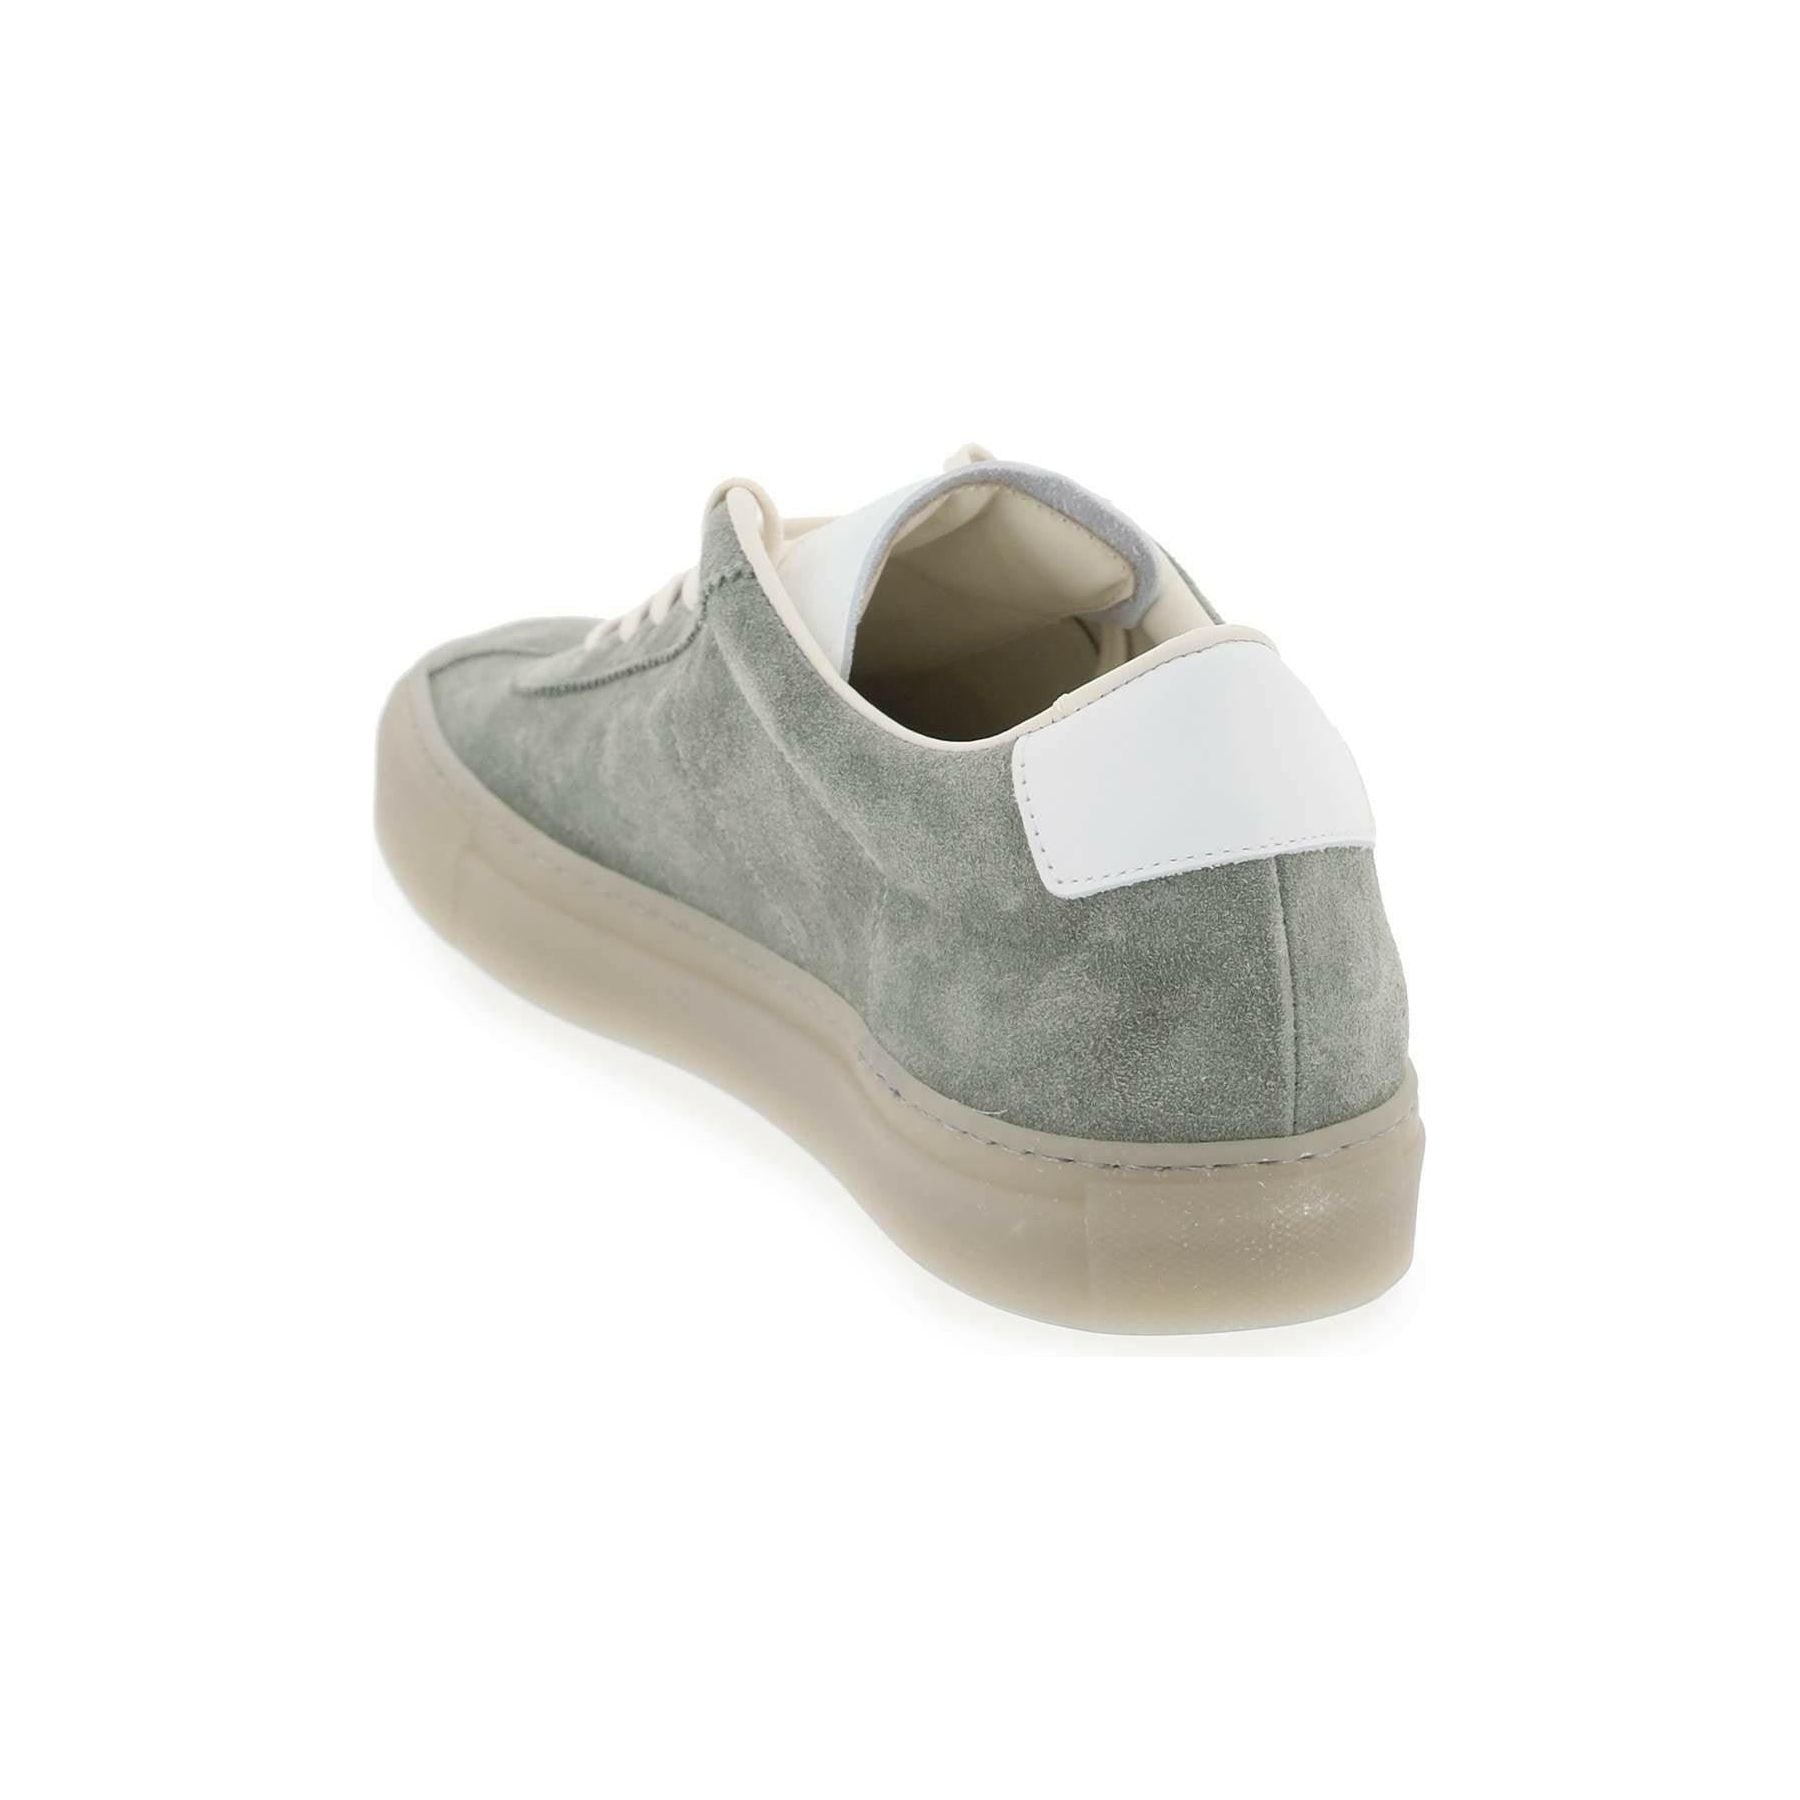 Sage Green 70's Tennis Suede Sneakers COMMON PROJECTS JOHN JULIA.